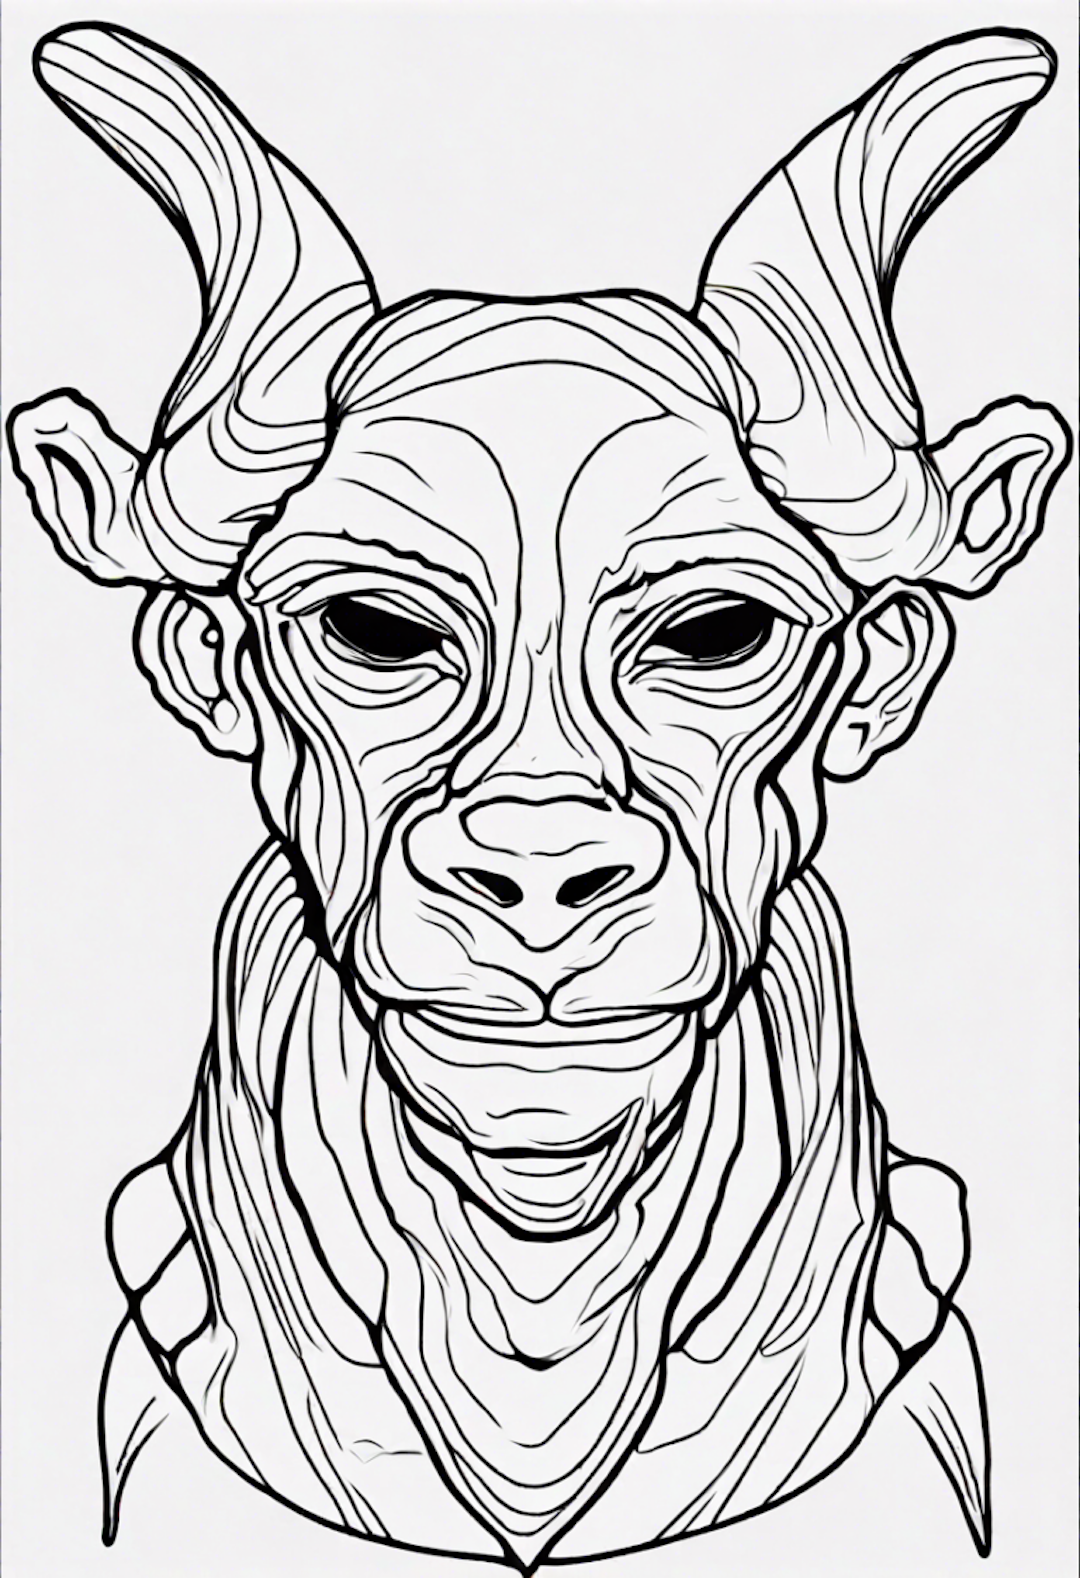 Mythical Capricorn Coloring Page coloring pages